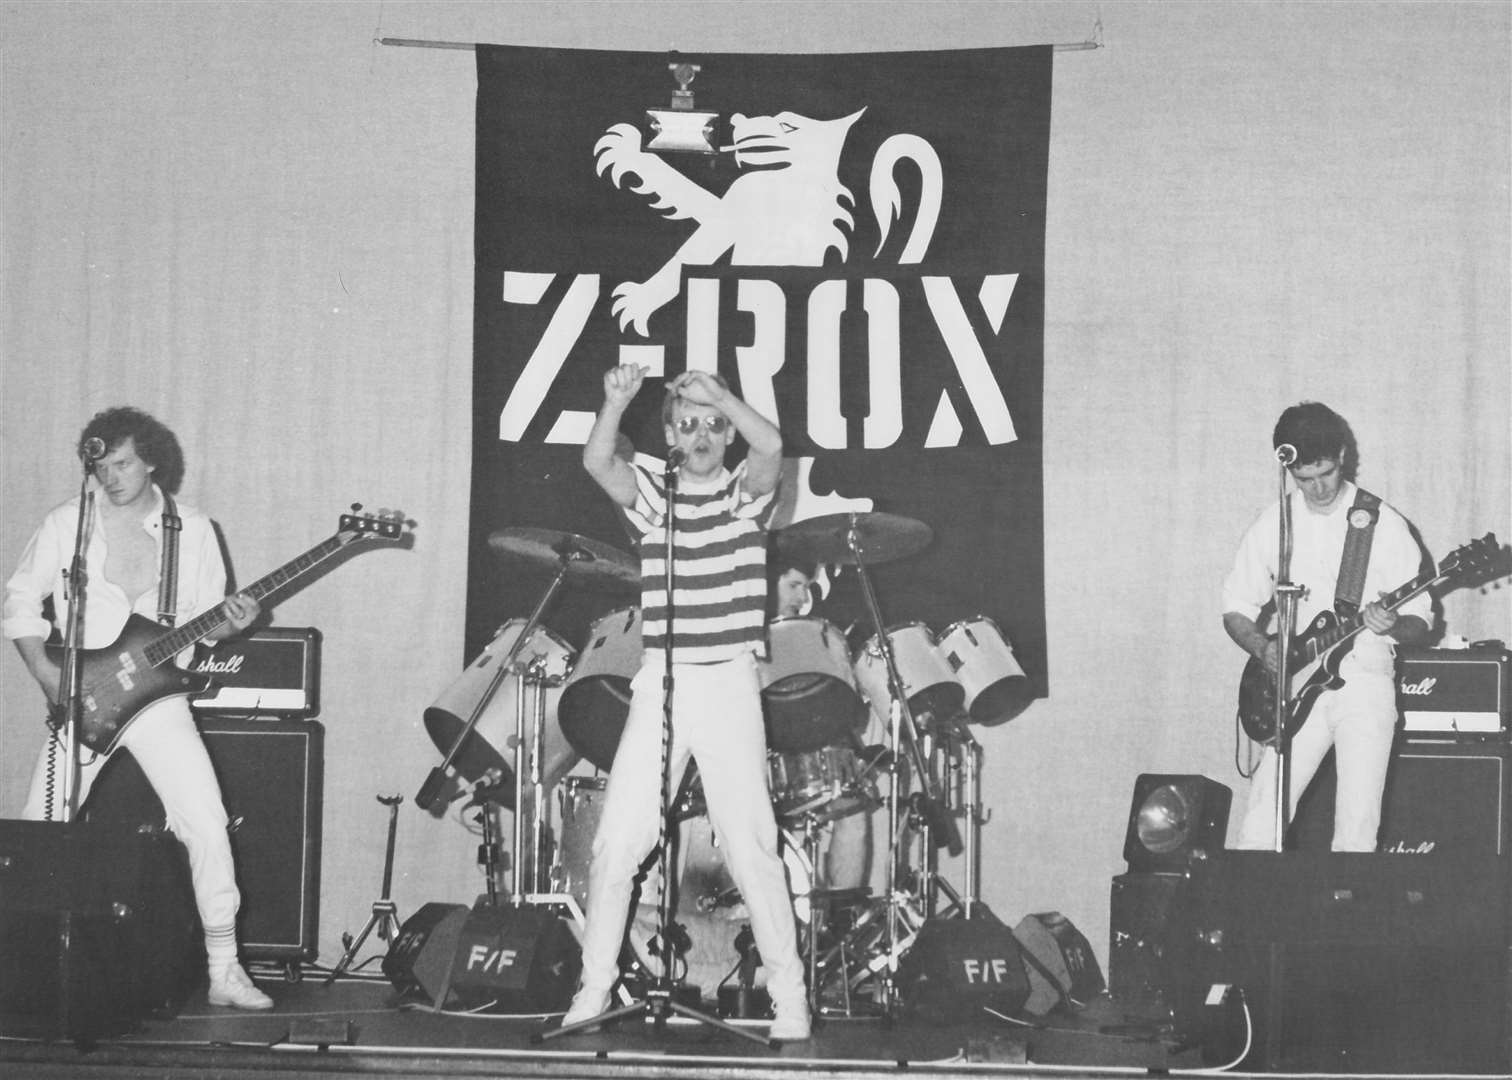 Z-ROX first recorded the album Face the Future in 1988.